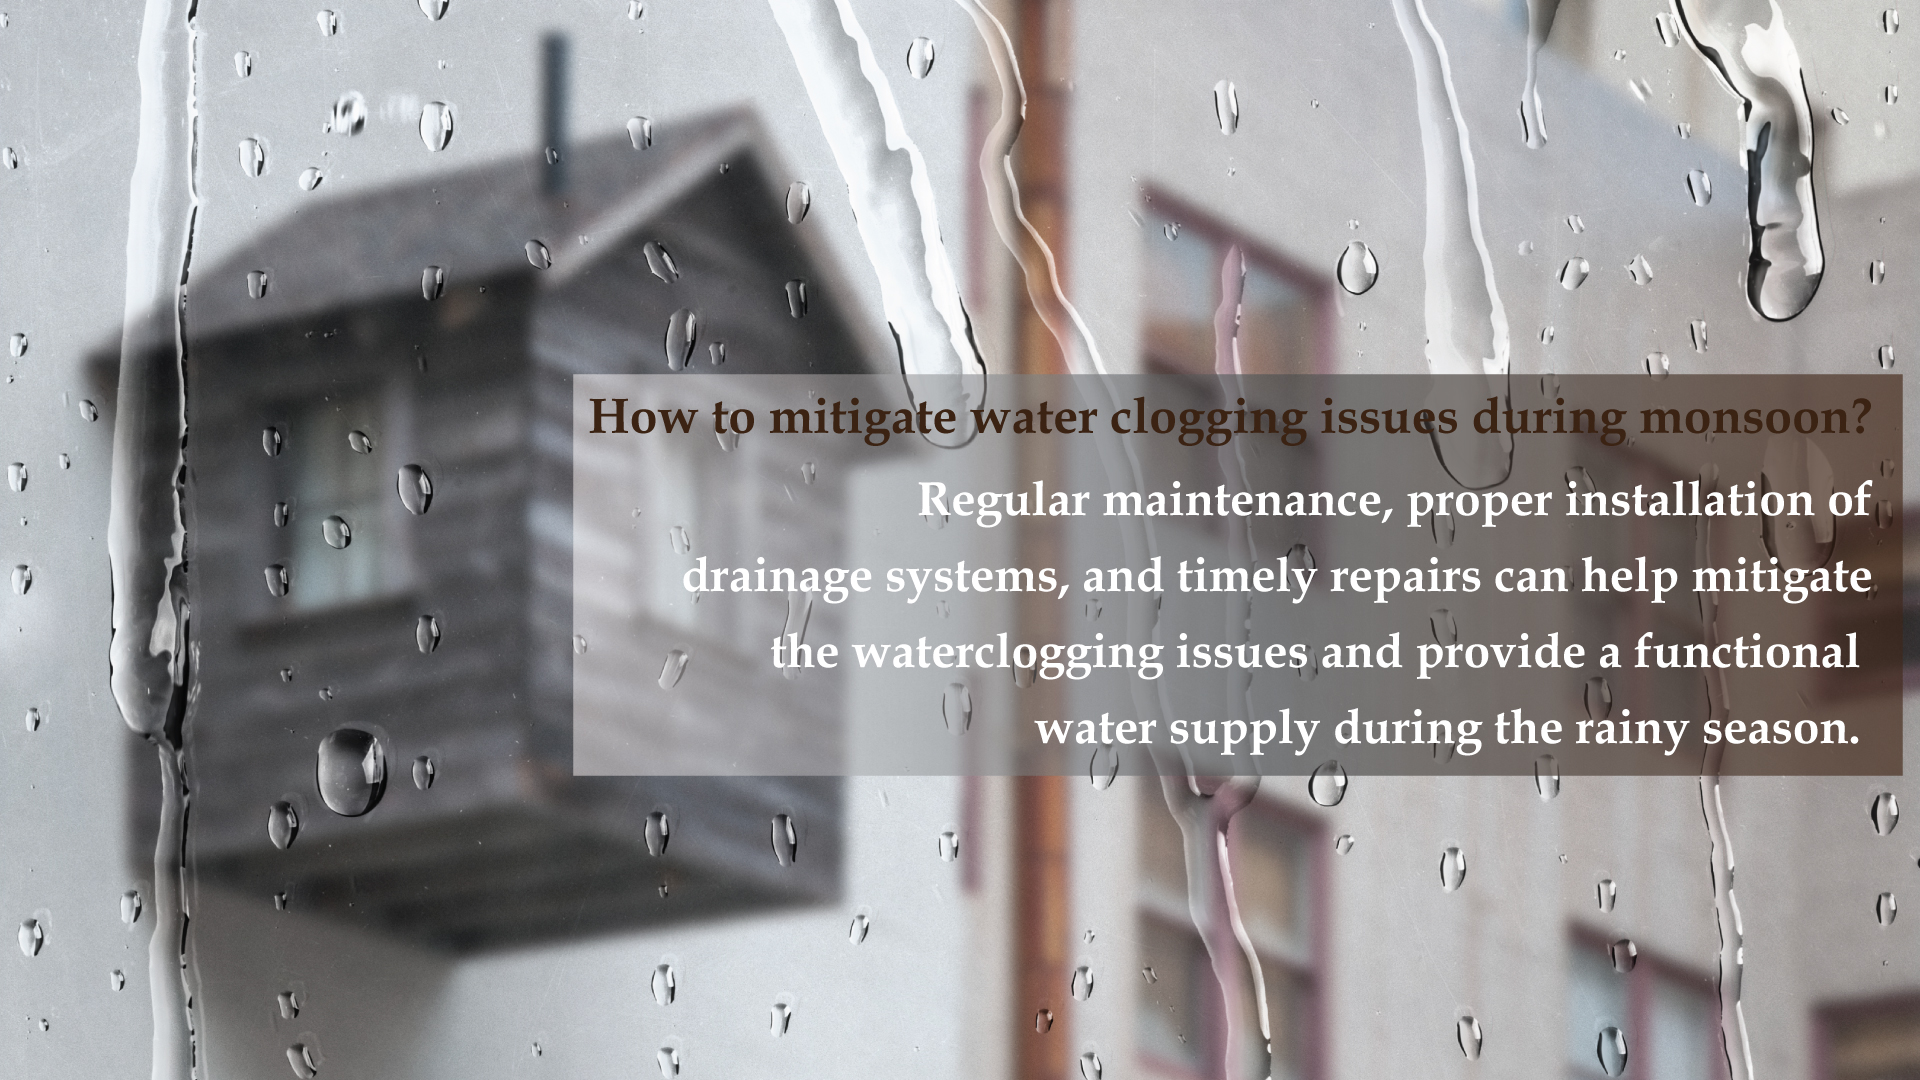 plumbing and drainage for home improvement 